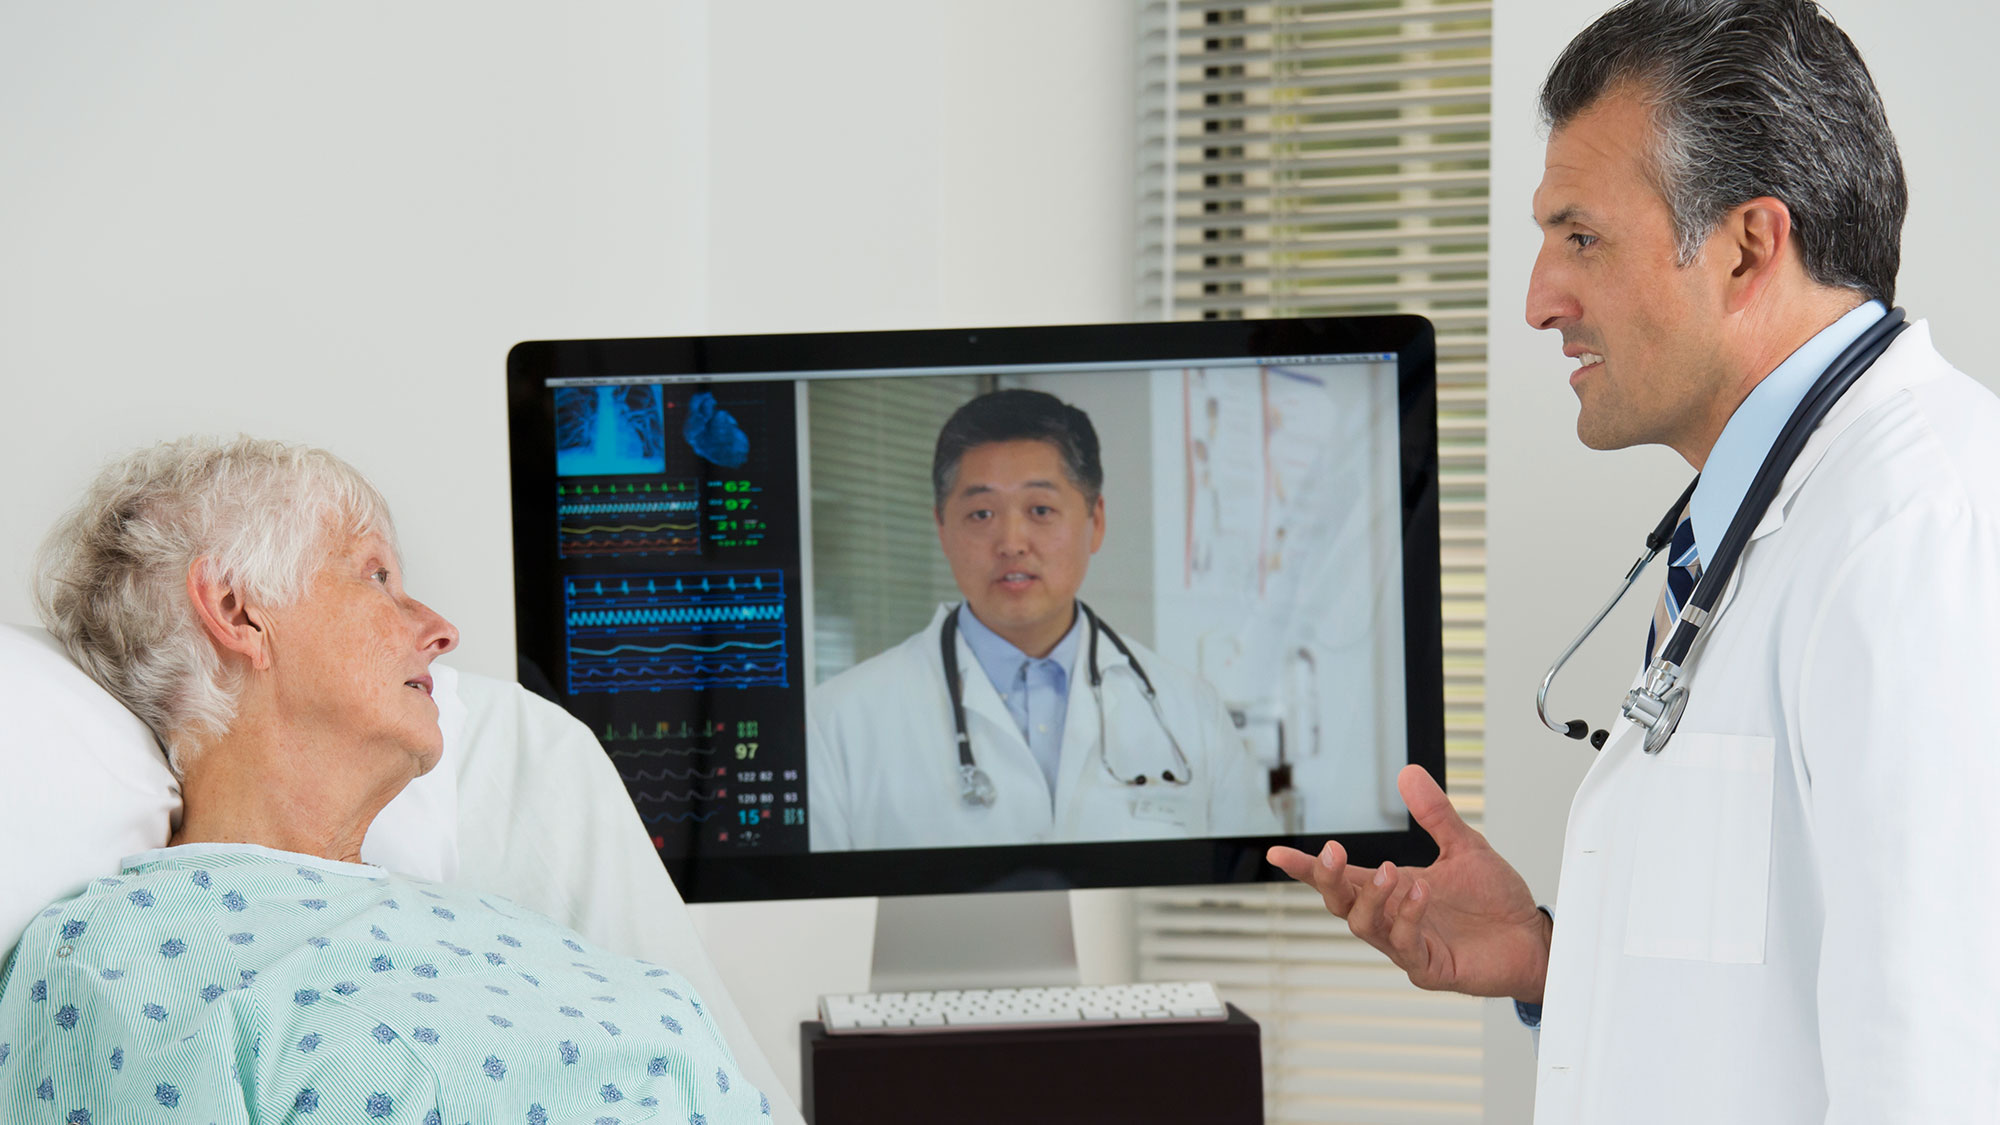 More physicians are telemedicine experts, professional network